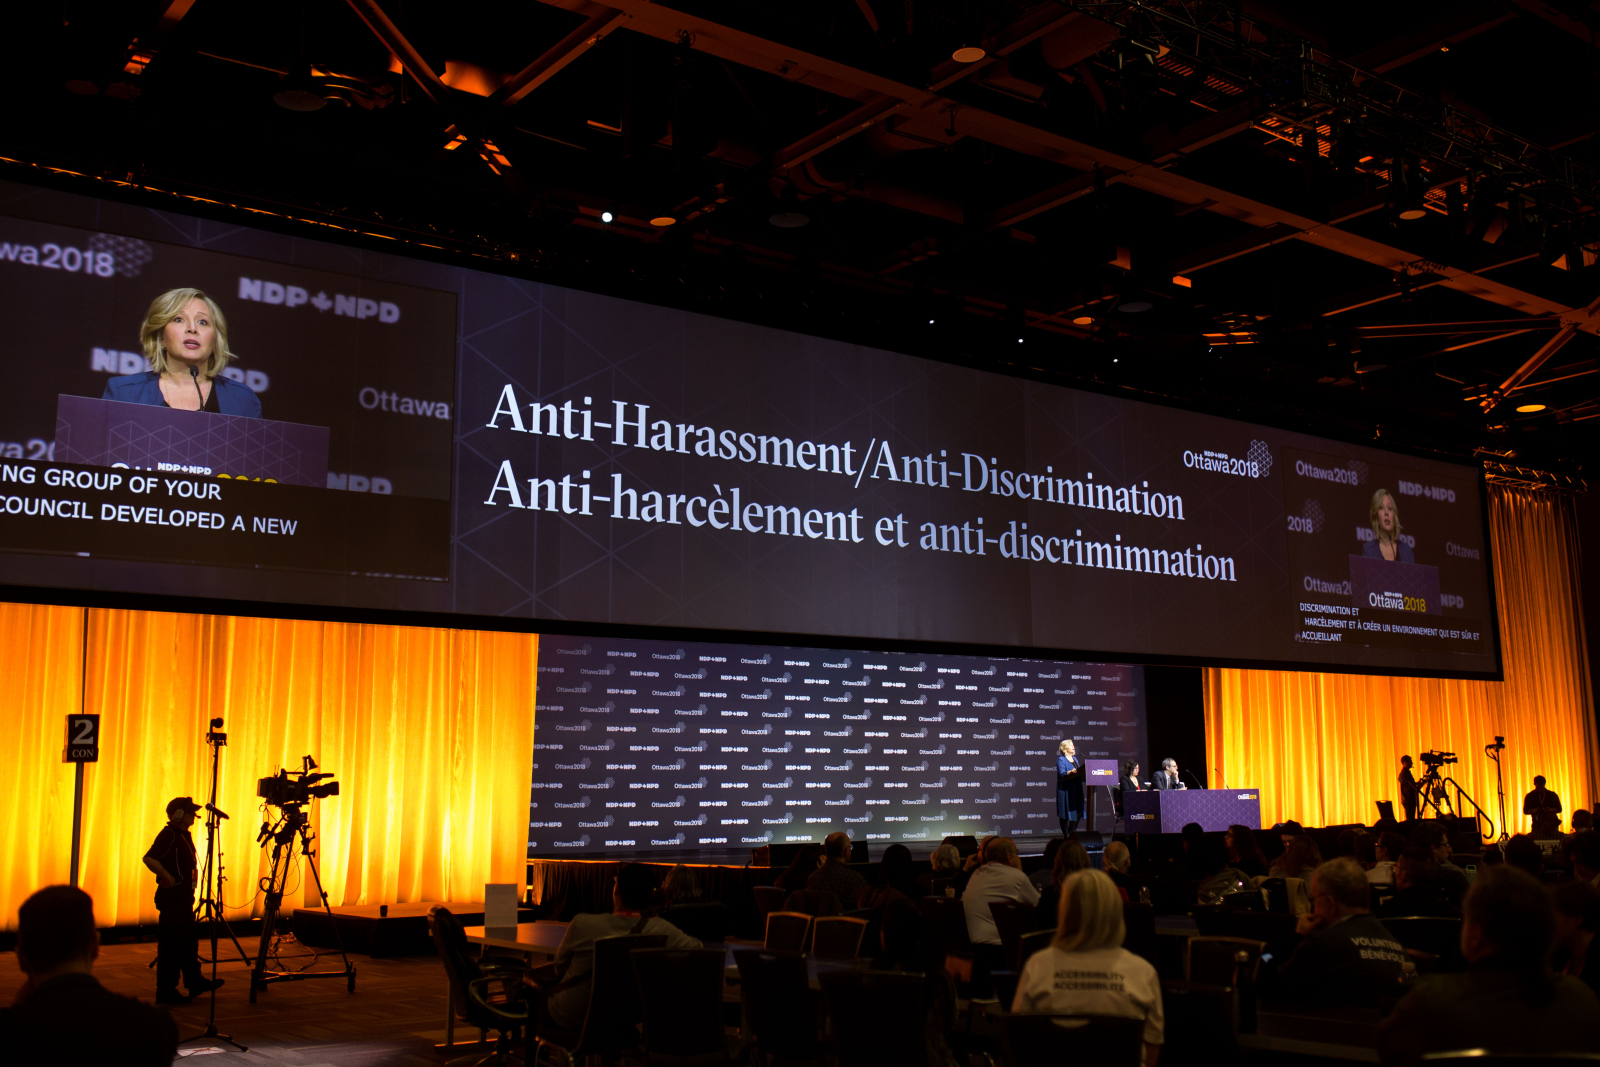 NDP President Marit Stiles outlined a new anti-harassment and anti-discrimination policy Feb. 16, 2018 in Ottawa. Photo by Alex Tétreault